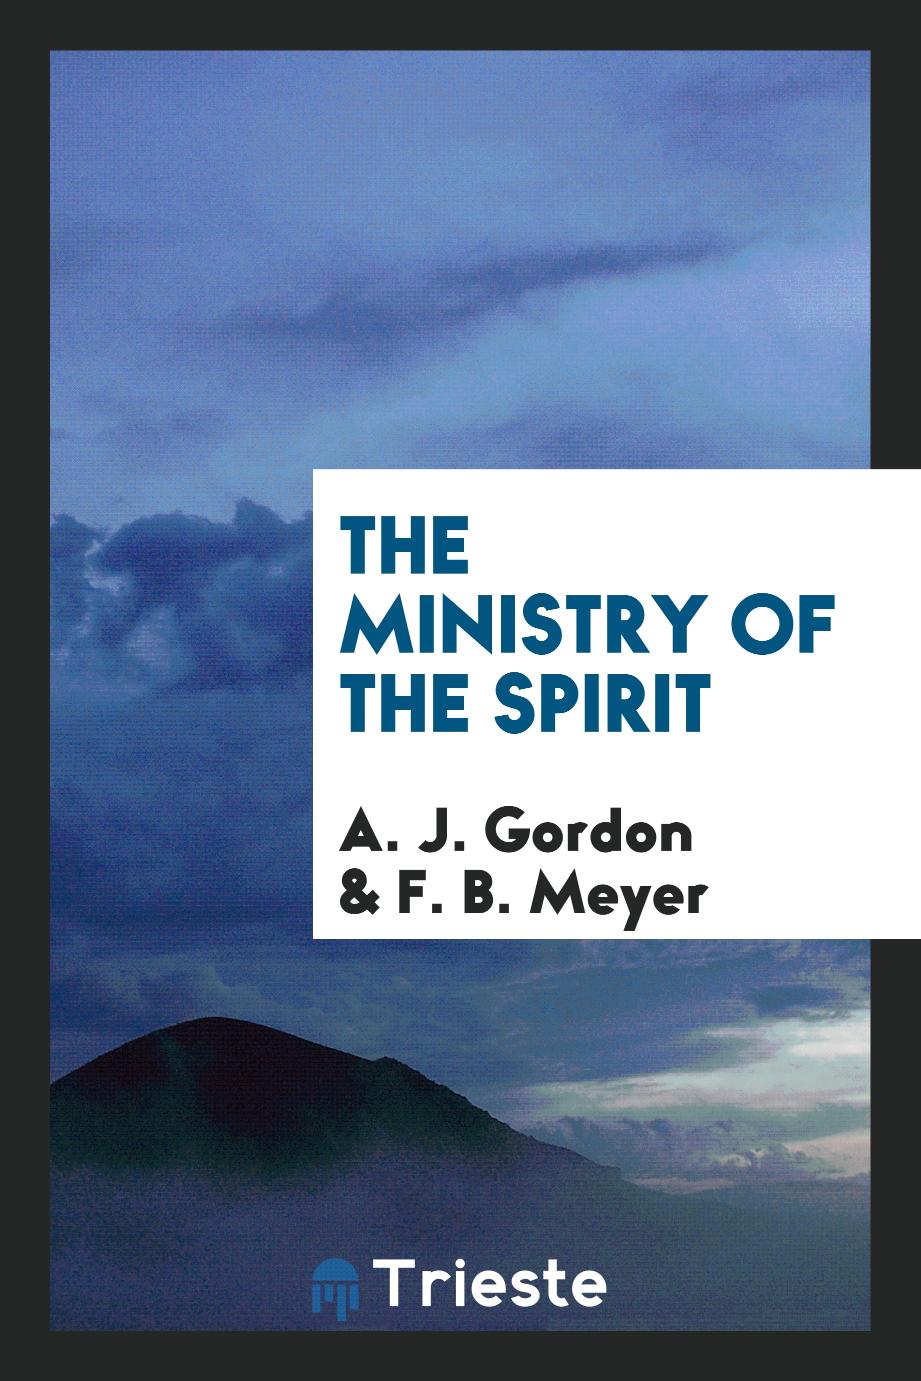 The ministry of the Spirit